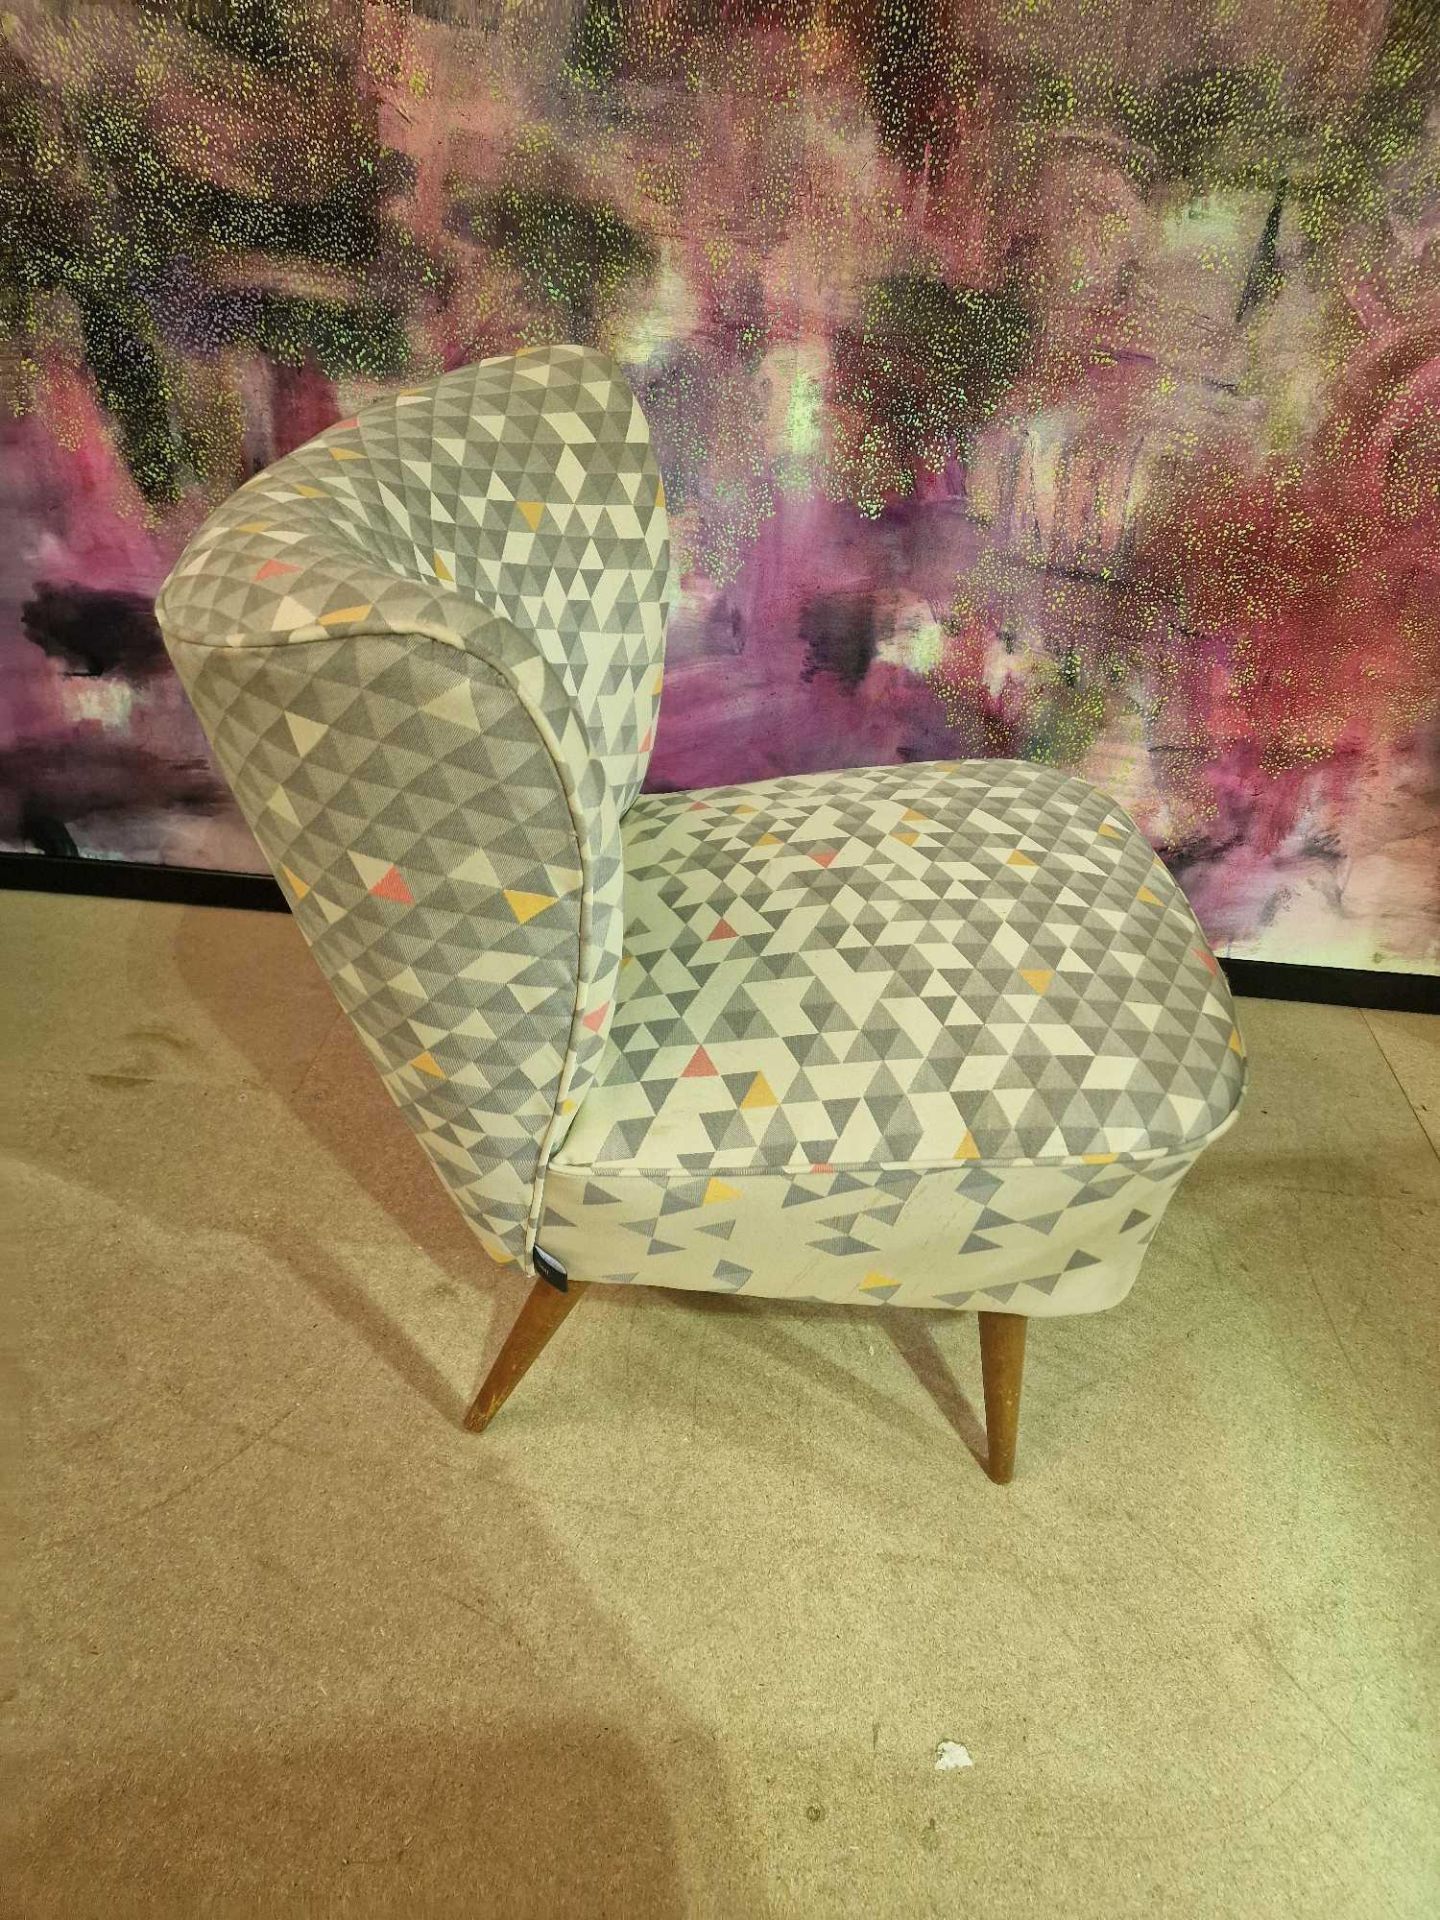 Slipper chair by Self Style Steeped in luxury, the geometric pattern upholstered chair is an elegant - Bild 3 aus 4